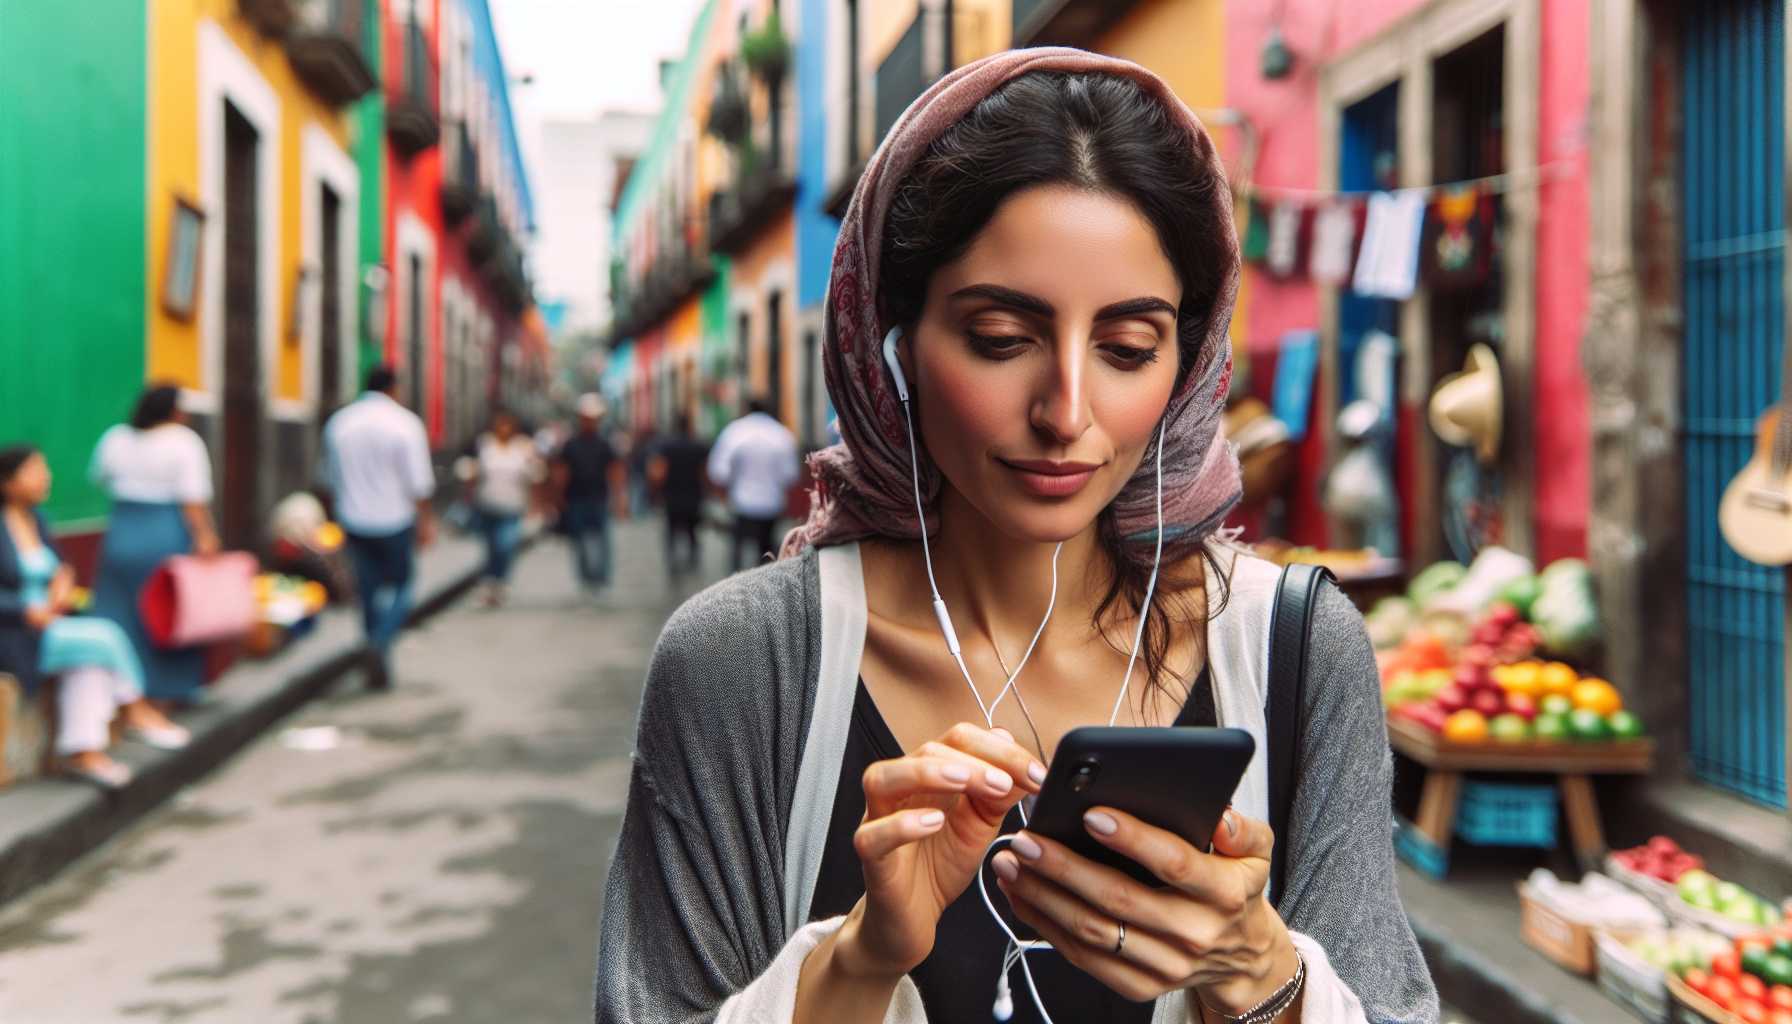 A person listening to music on their phone while walking down a street in Mexico City.